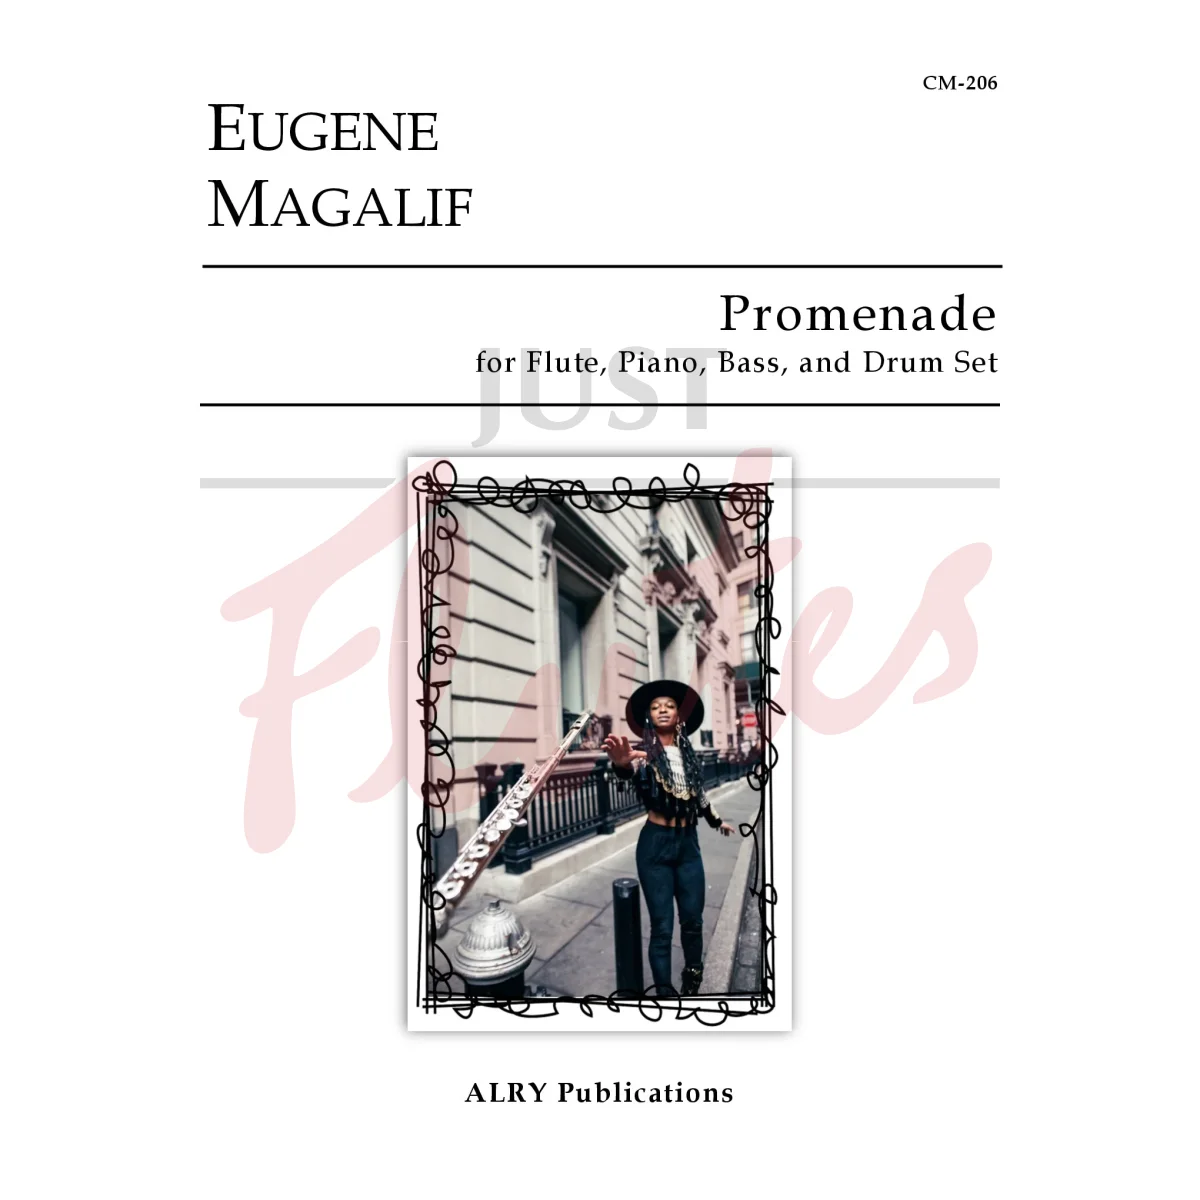 Promenade for Flute, Piano, Bass and Drum Set